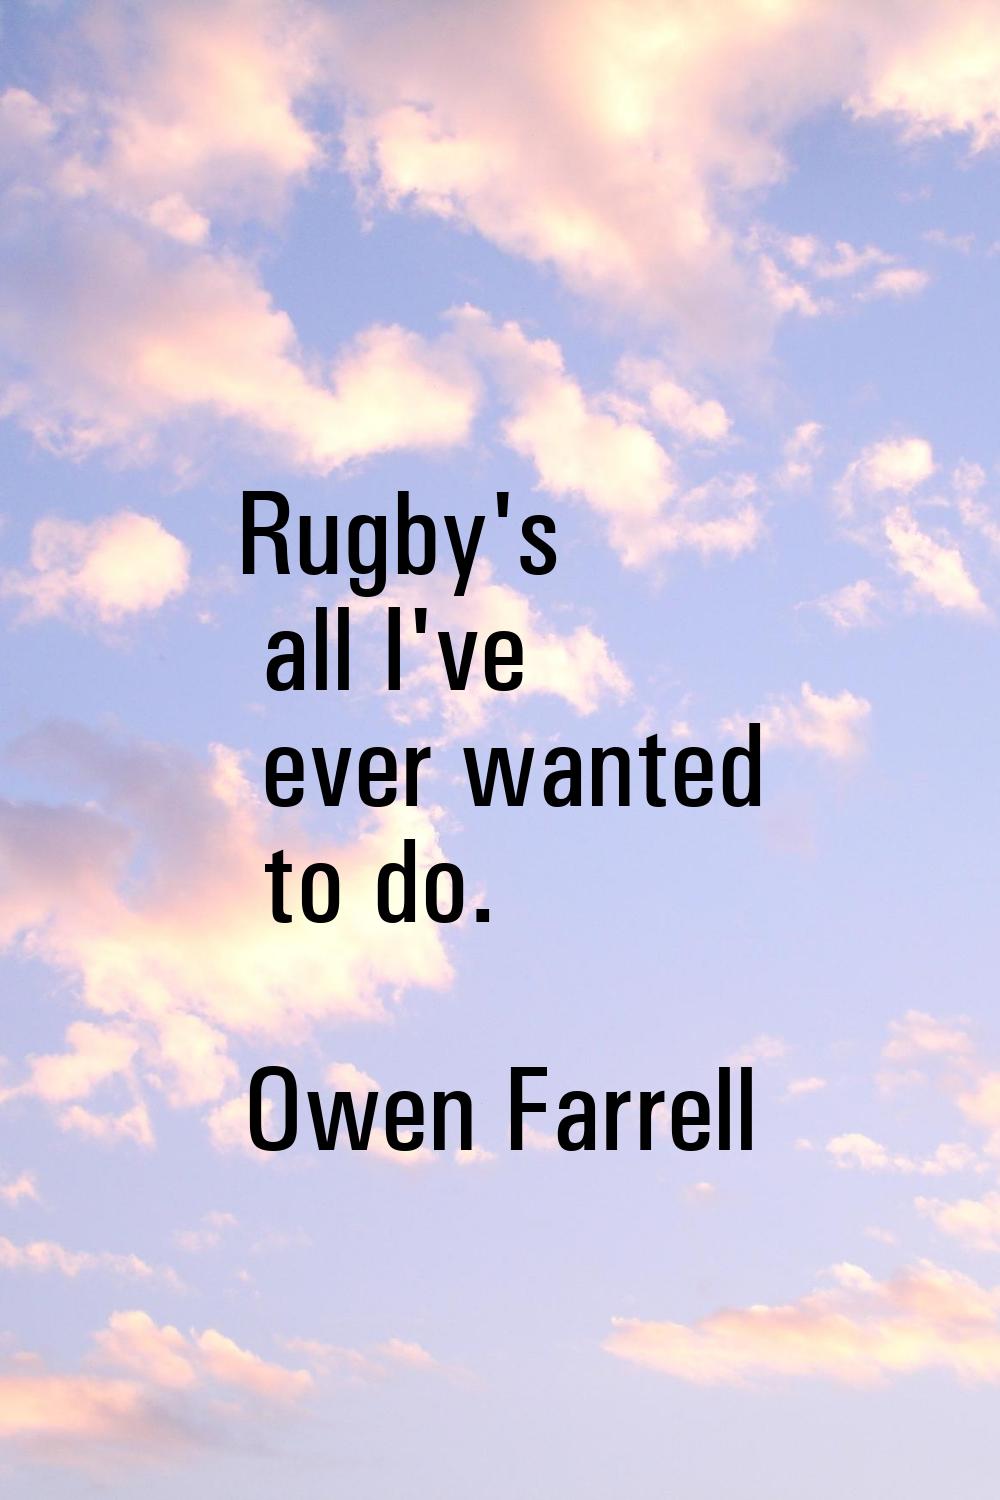 Rugby's all I've ever wanted to do.